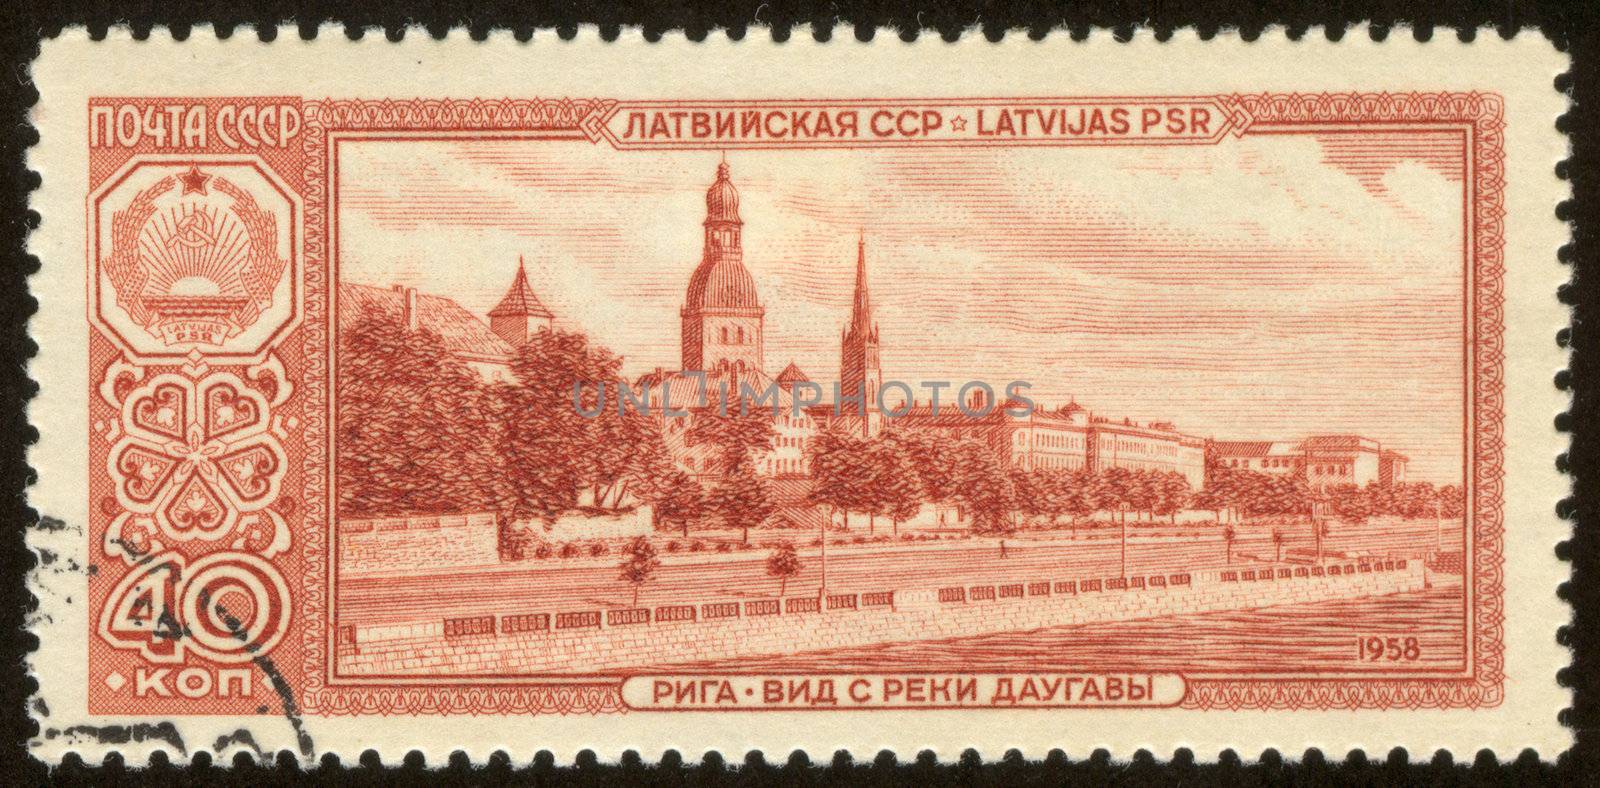 The scanned stamp. The Soviet stamp. The city of Riga, capital of Latvia.